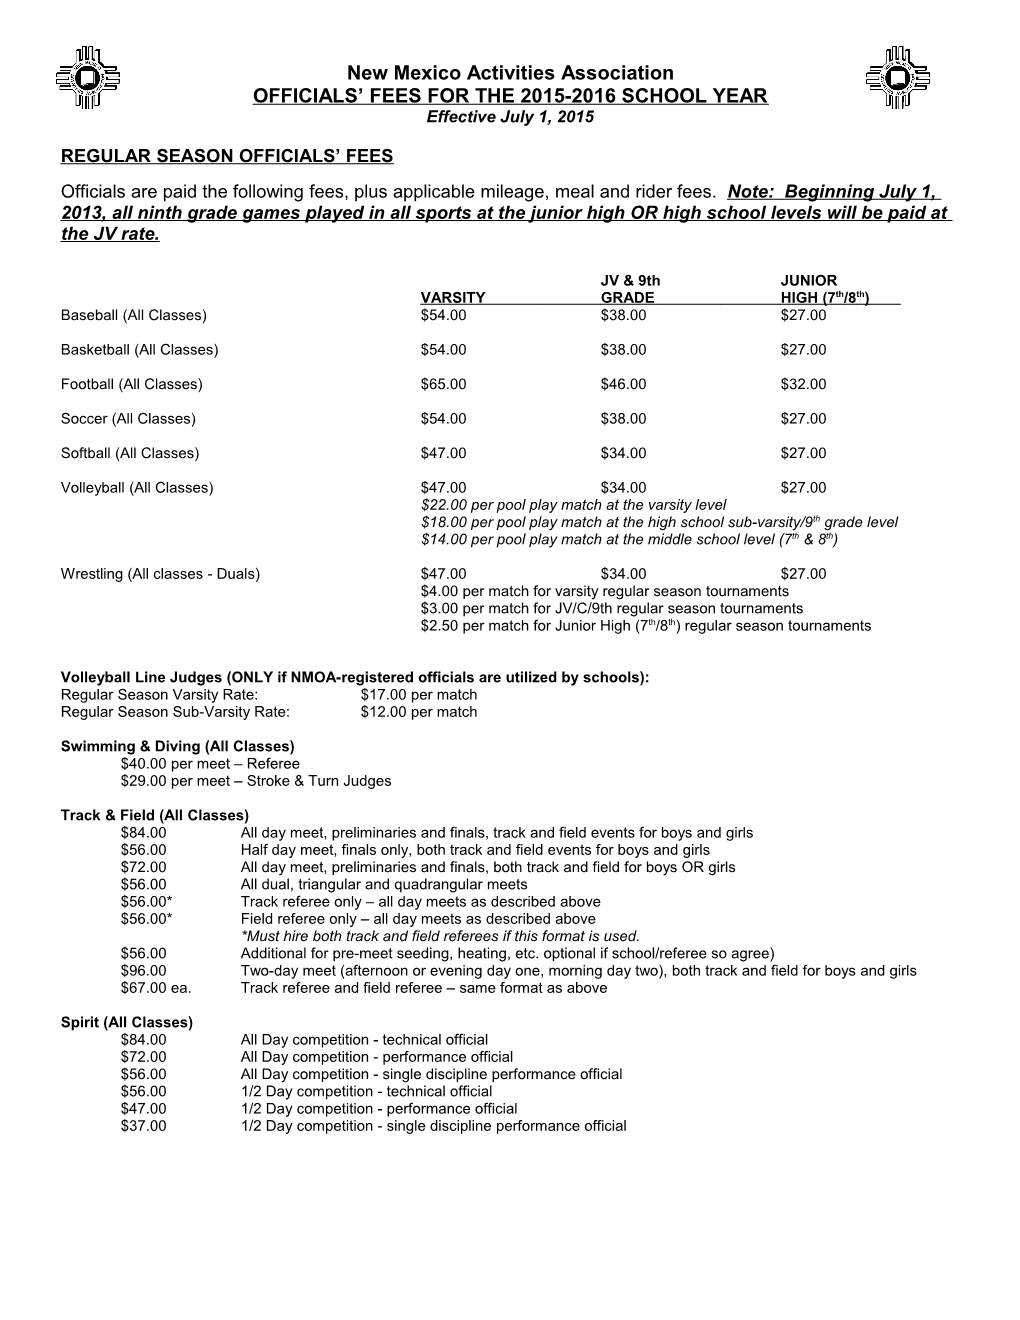 Officials Fees for the 2015-2016 School Year